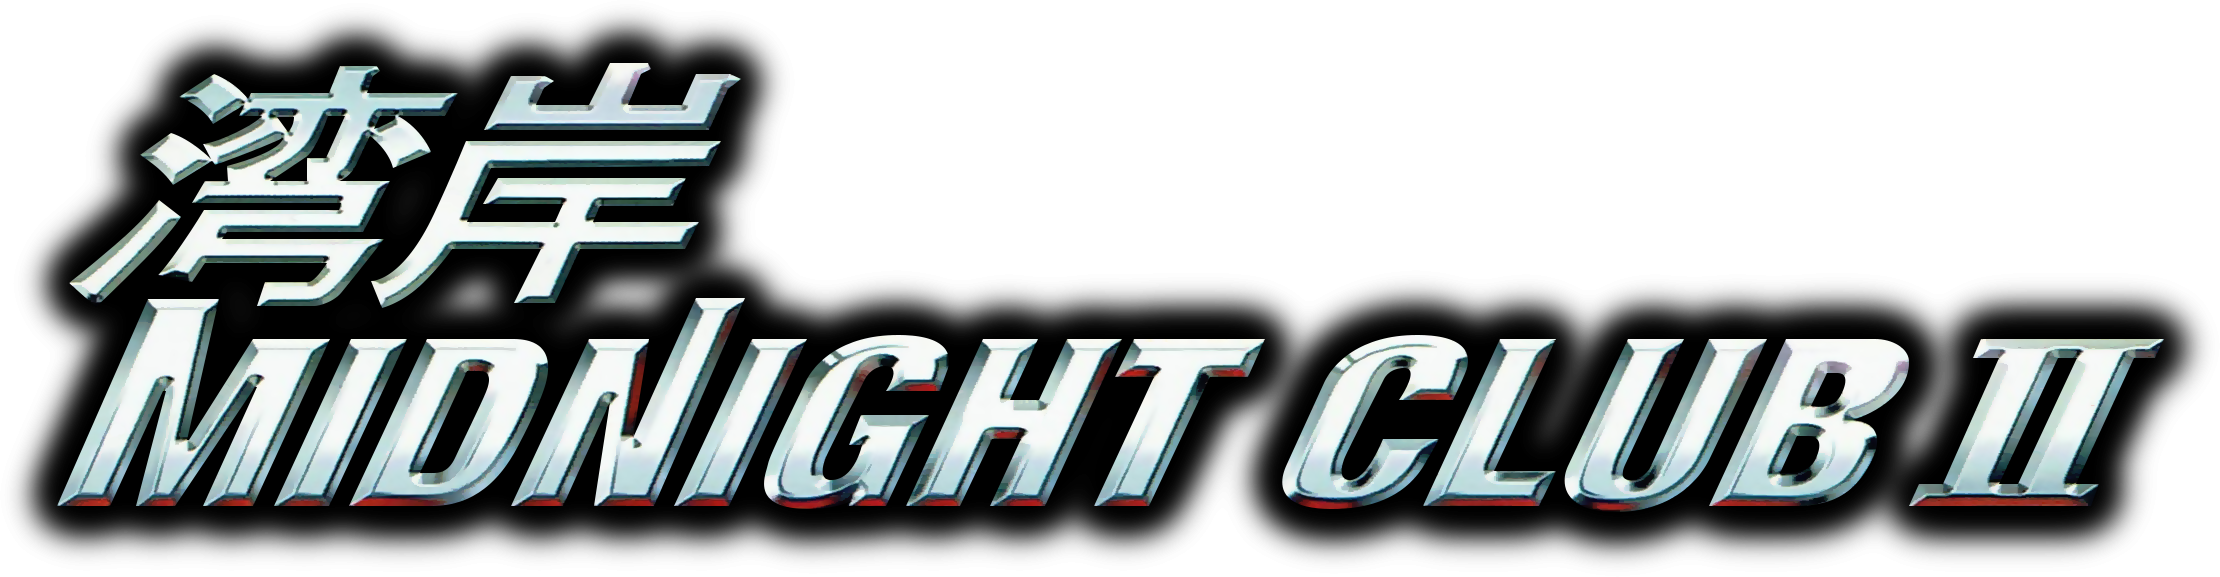 Midnight Club II Images - LaunchBox Games Database